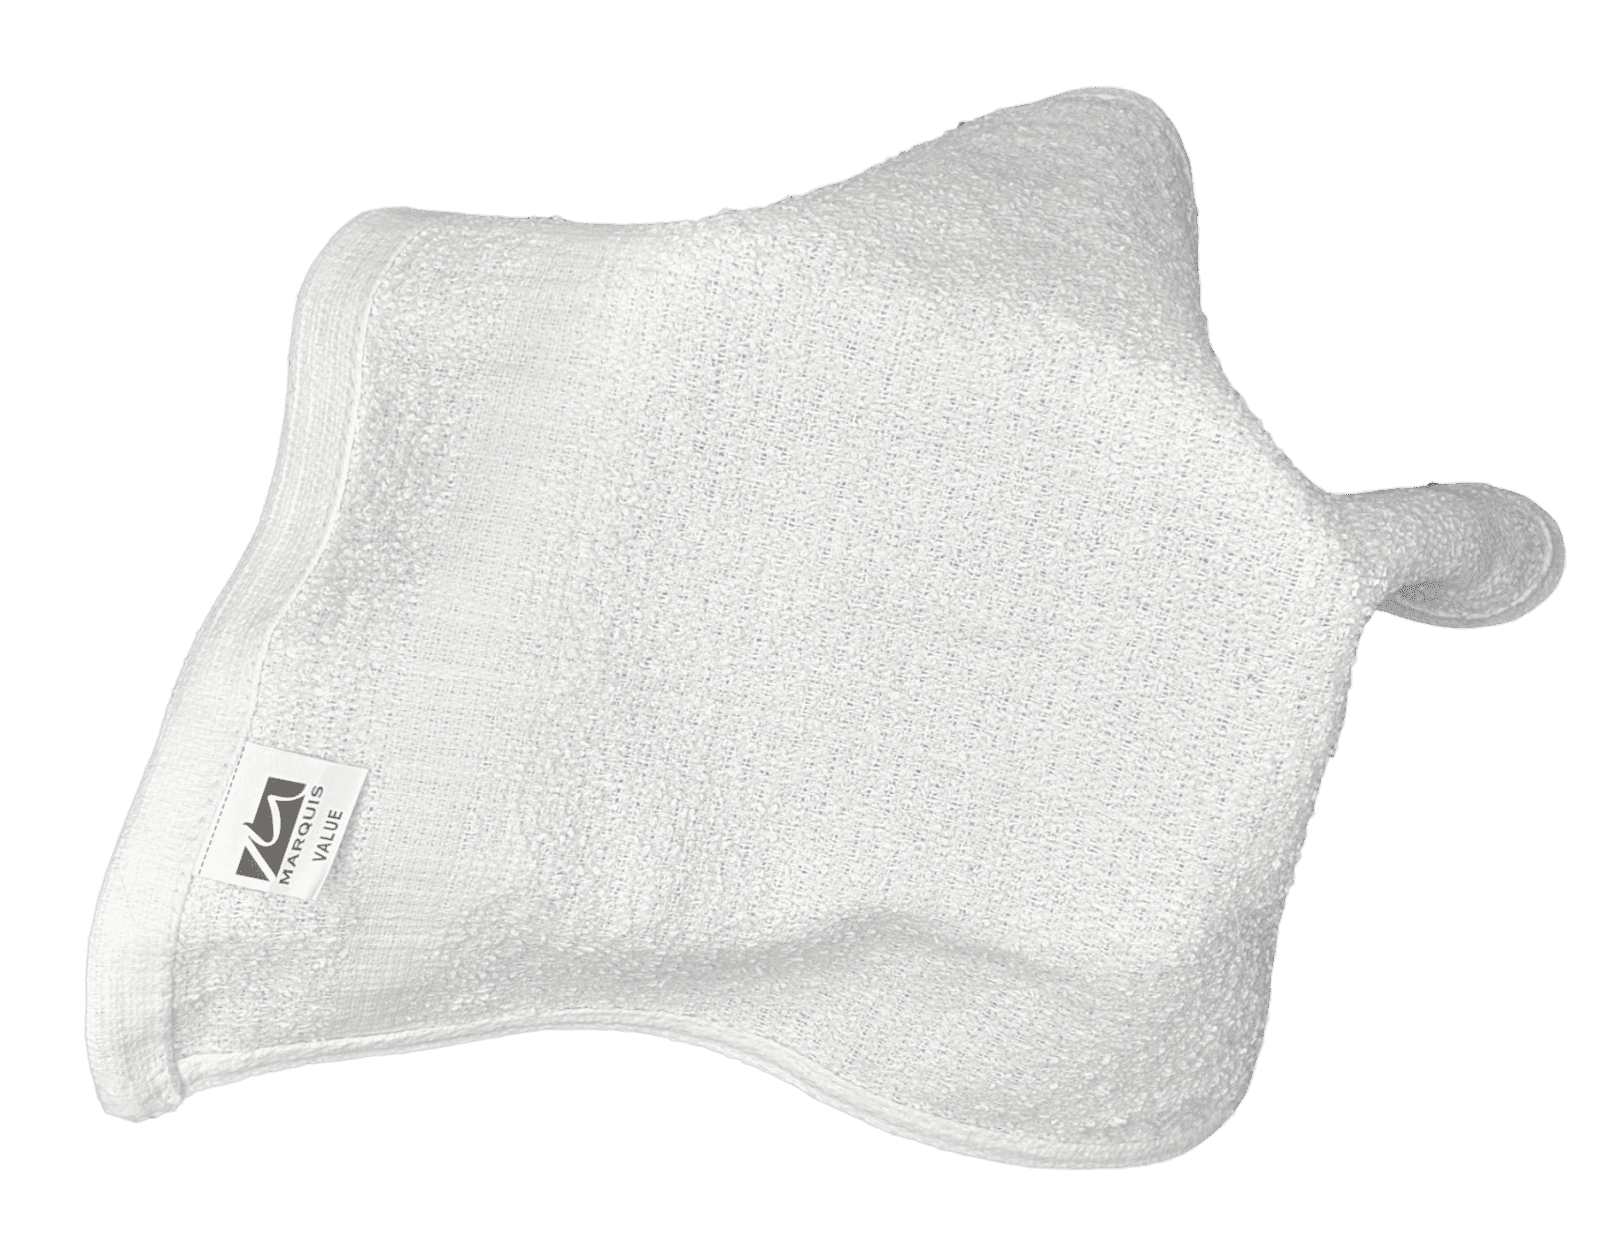 360 Pack - 12 x 12 White Cotton Value Washcloth Rags | Spa Painting  Cleaning Airbnb | Bulk Wholesale Case Packs